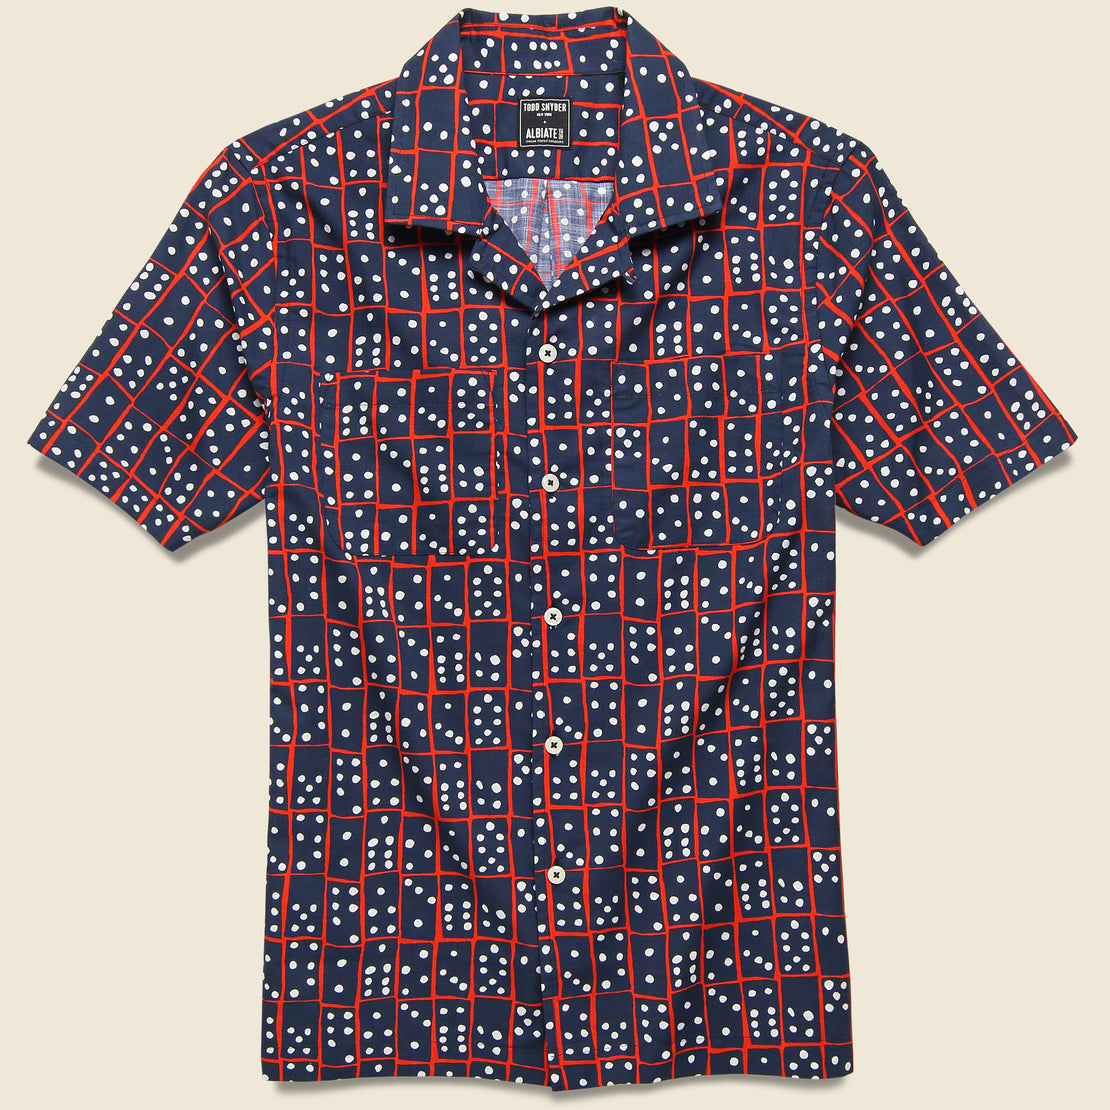 Todd Snyder Domino Camp Shirt - Navy/Red